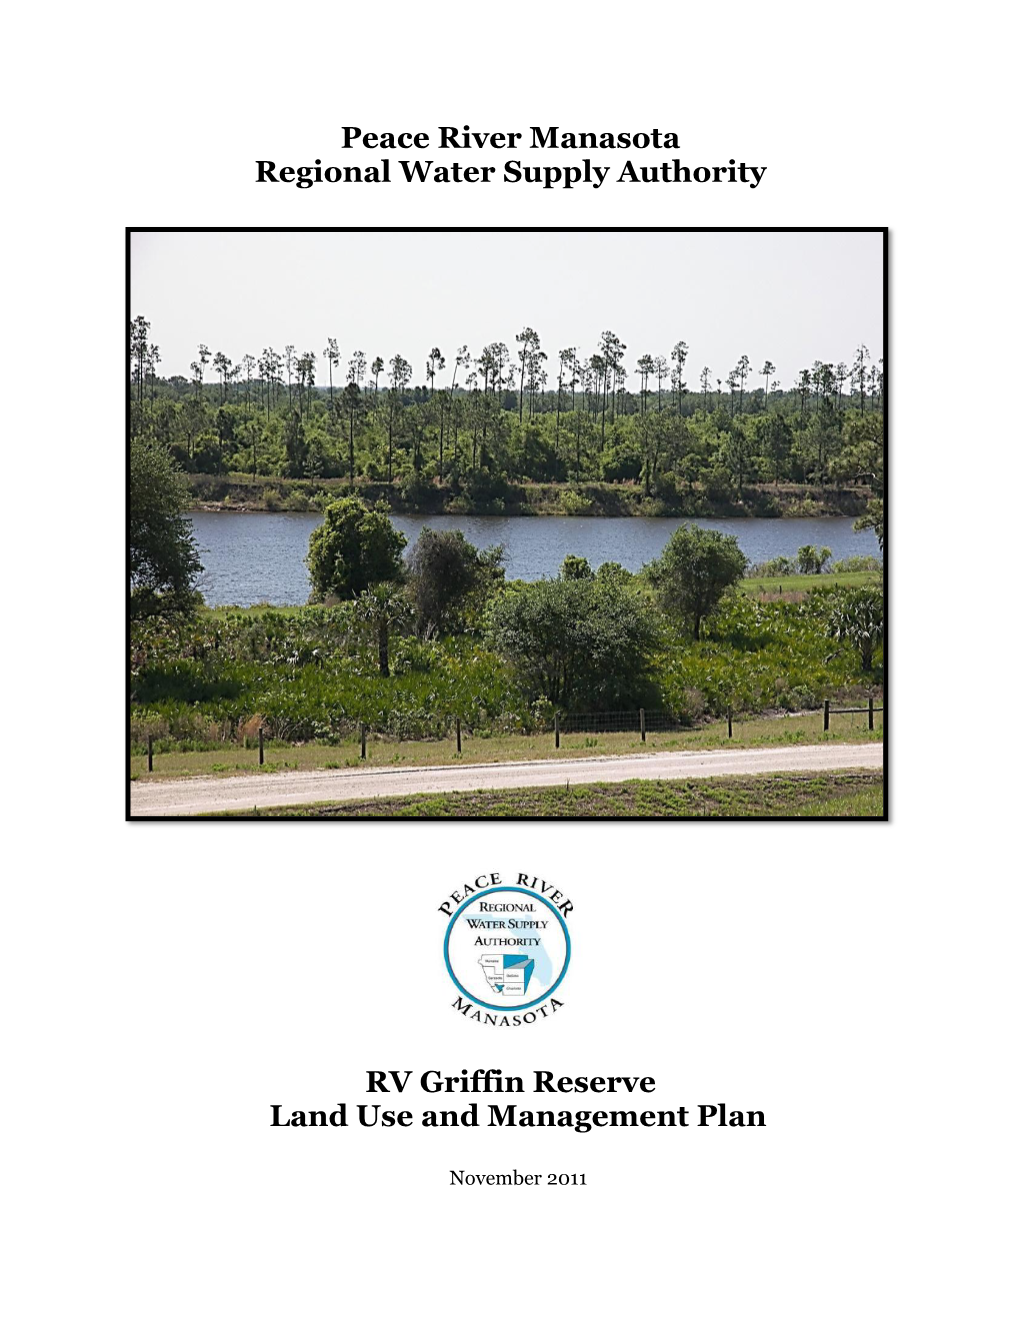 RV Griffin Reserve Land Use and Management Plan